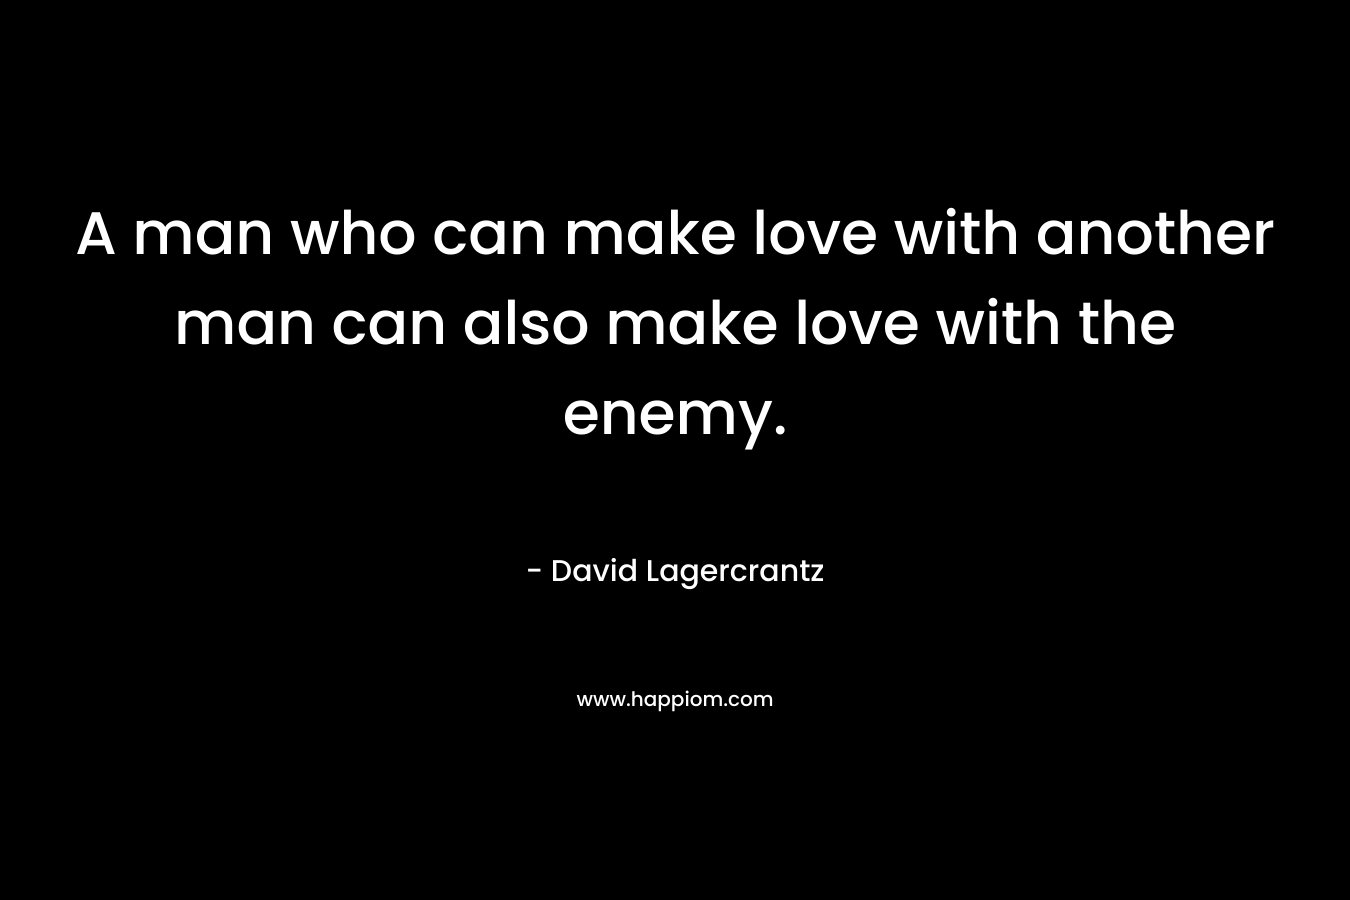 A man who can make love with another man can also make love with the enemy.